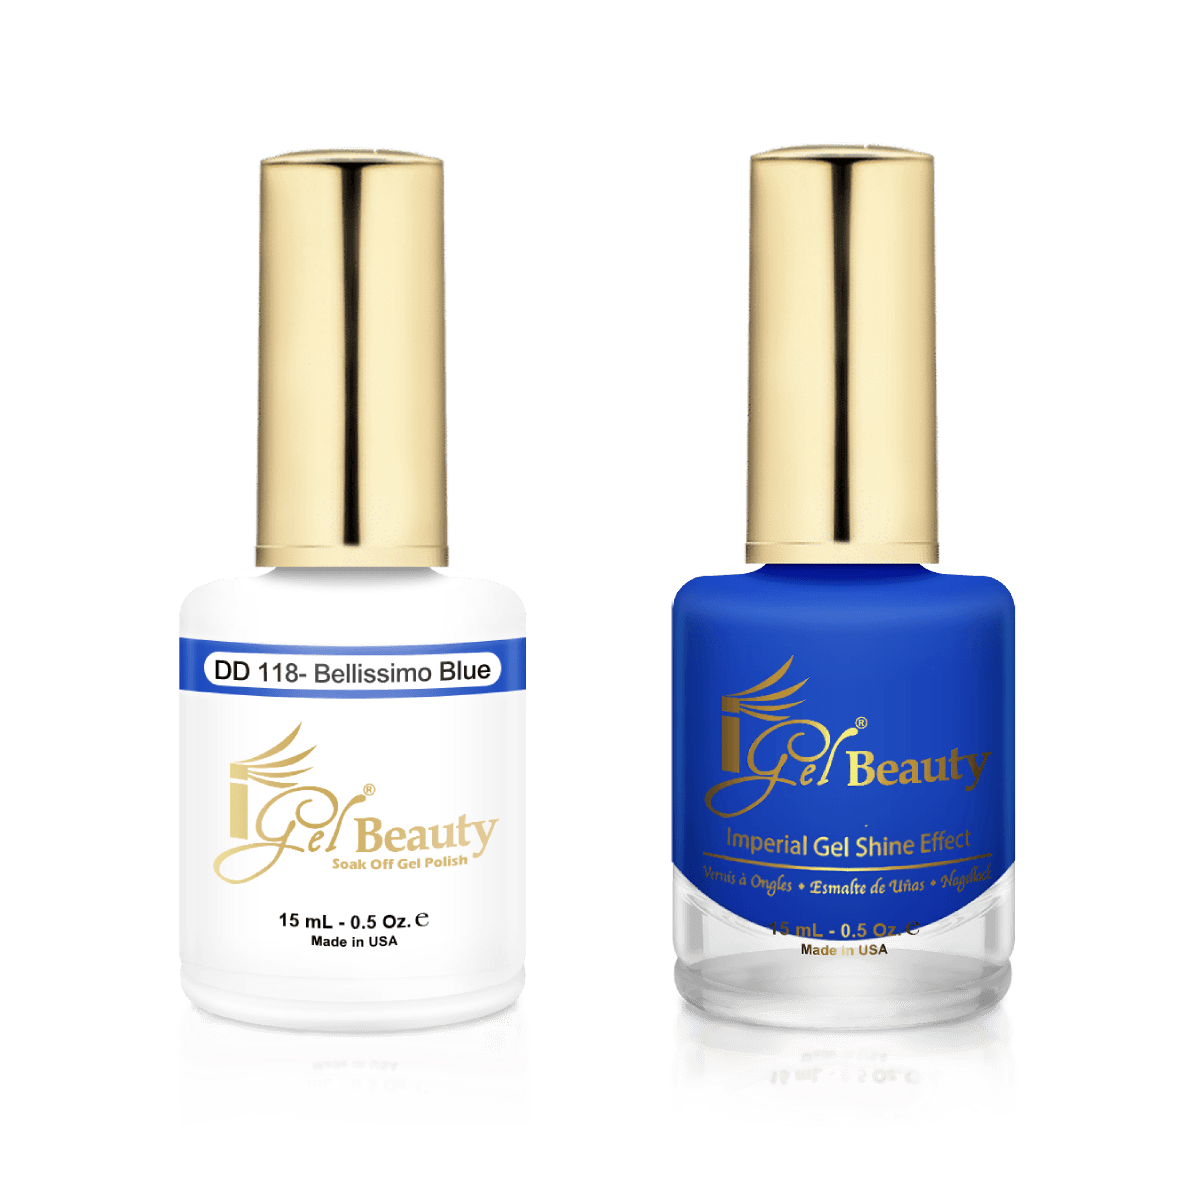 IGel Duo Gel Polish + Matching Nail Lacquer DD 118 BELLISSIMO BLUE